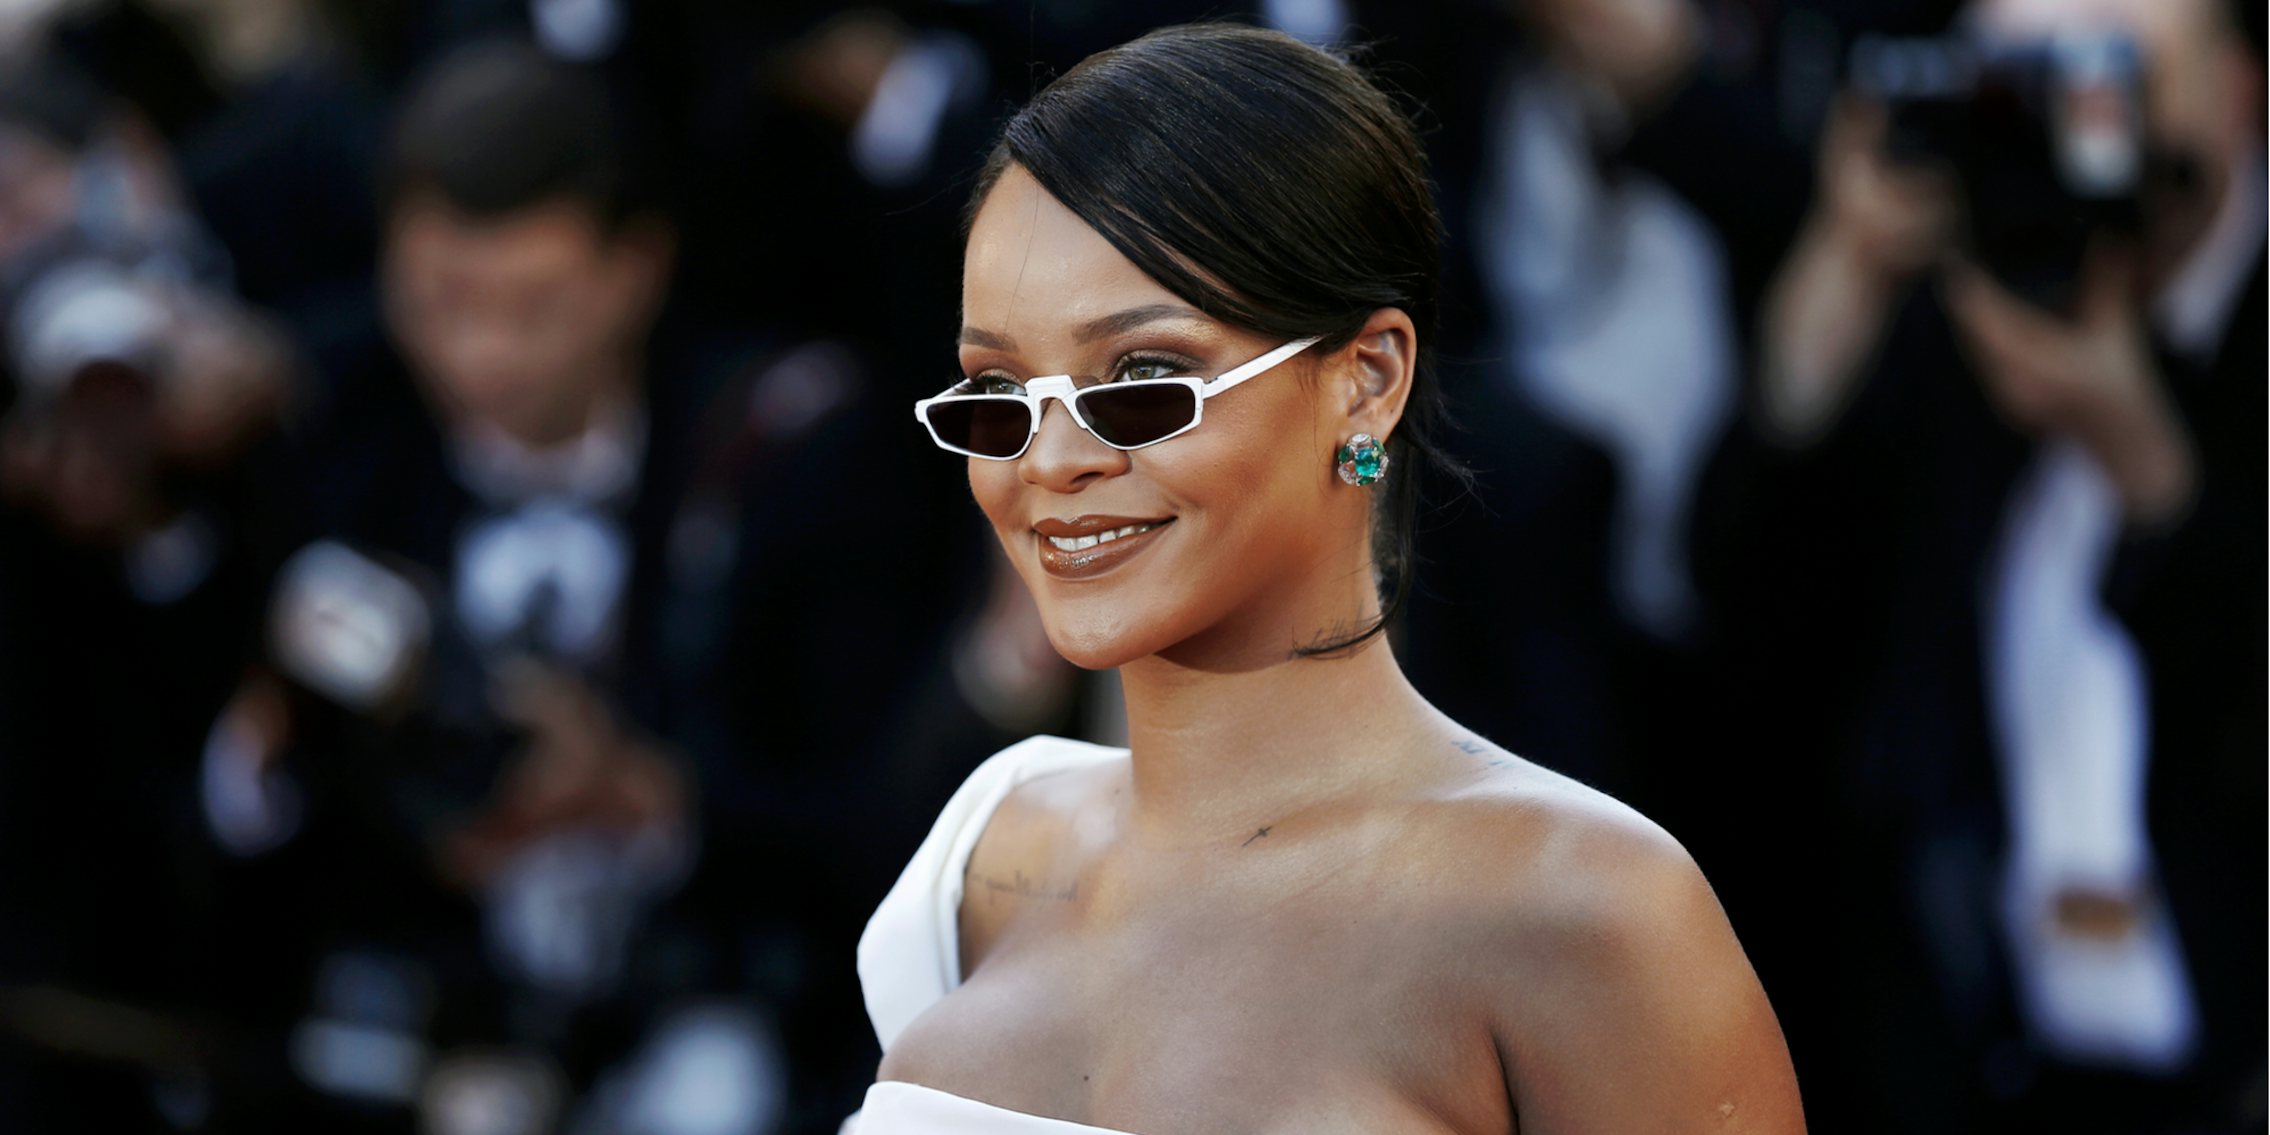 Rihanna accused of cultural appropriation for necklace featuring Hindu deity.